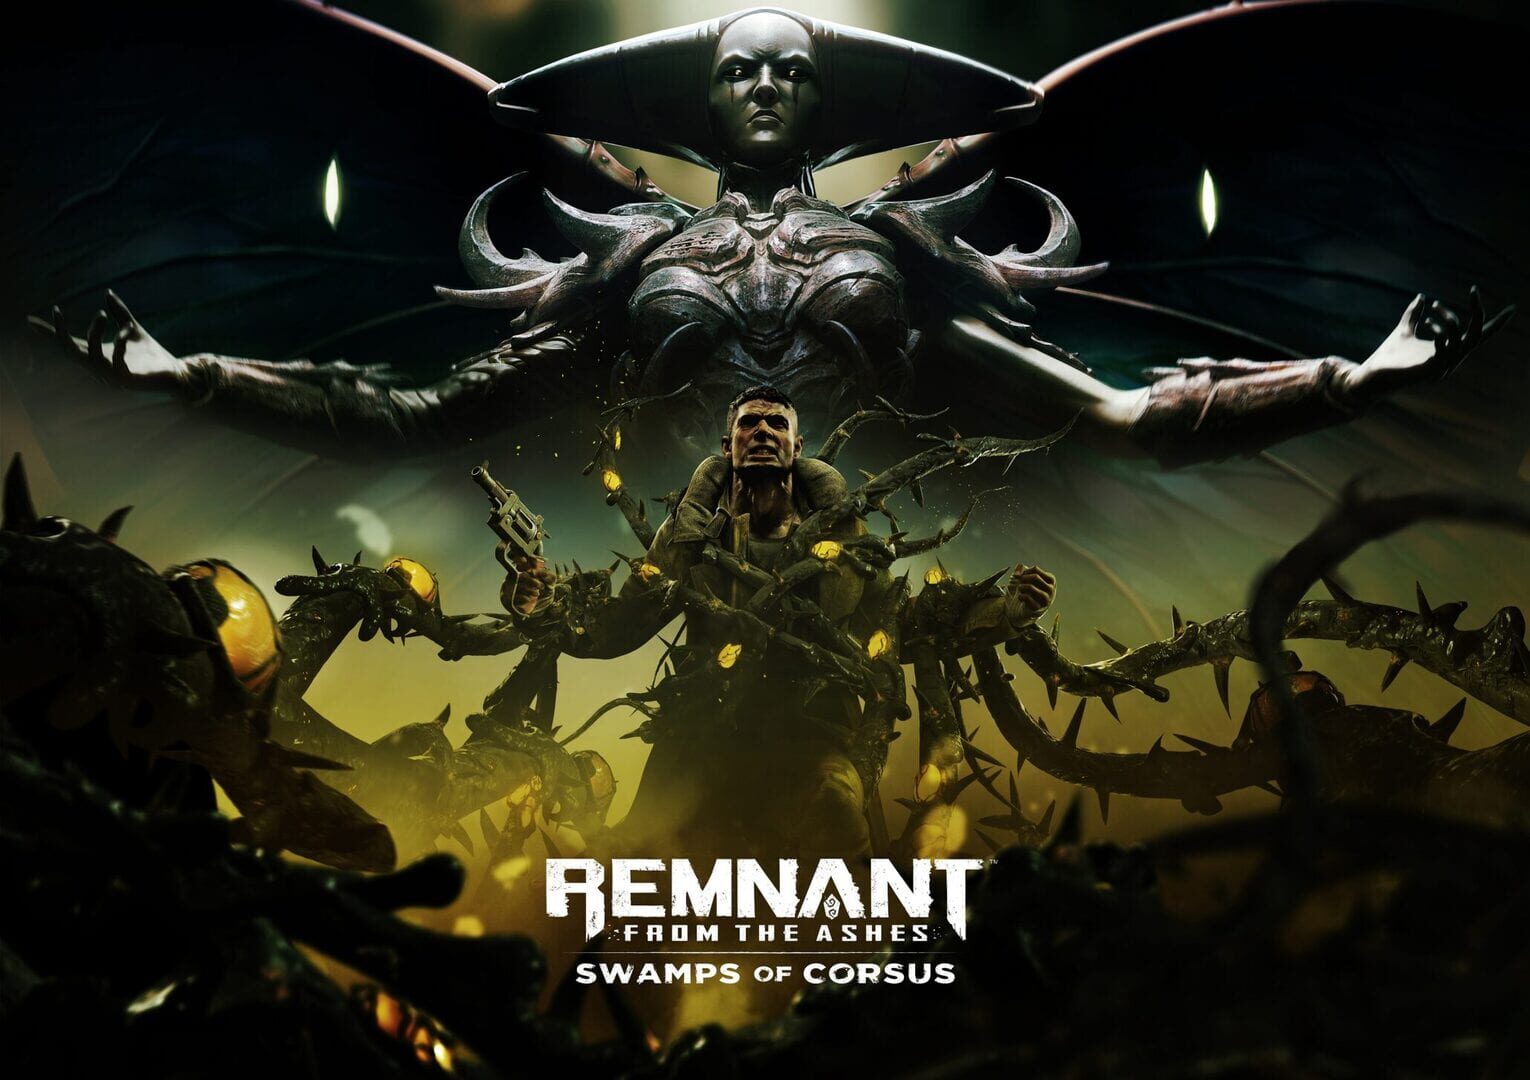 Remnant: From the Ashes - Swamps of Corsus Image